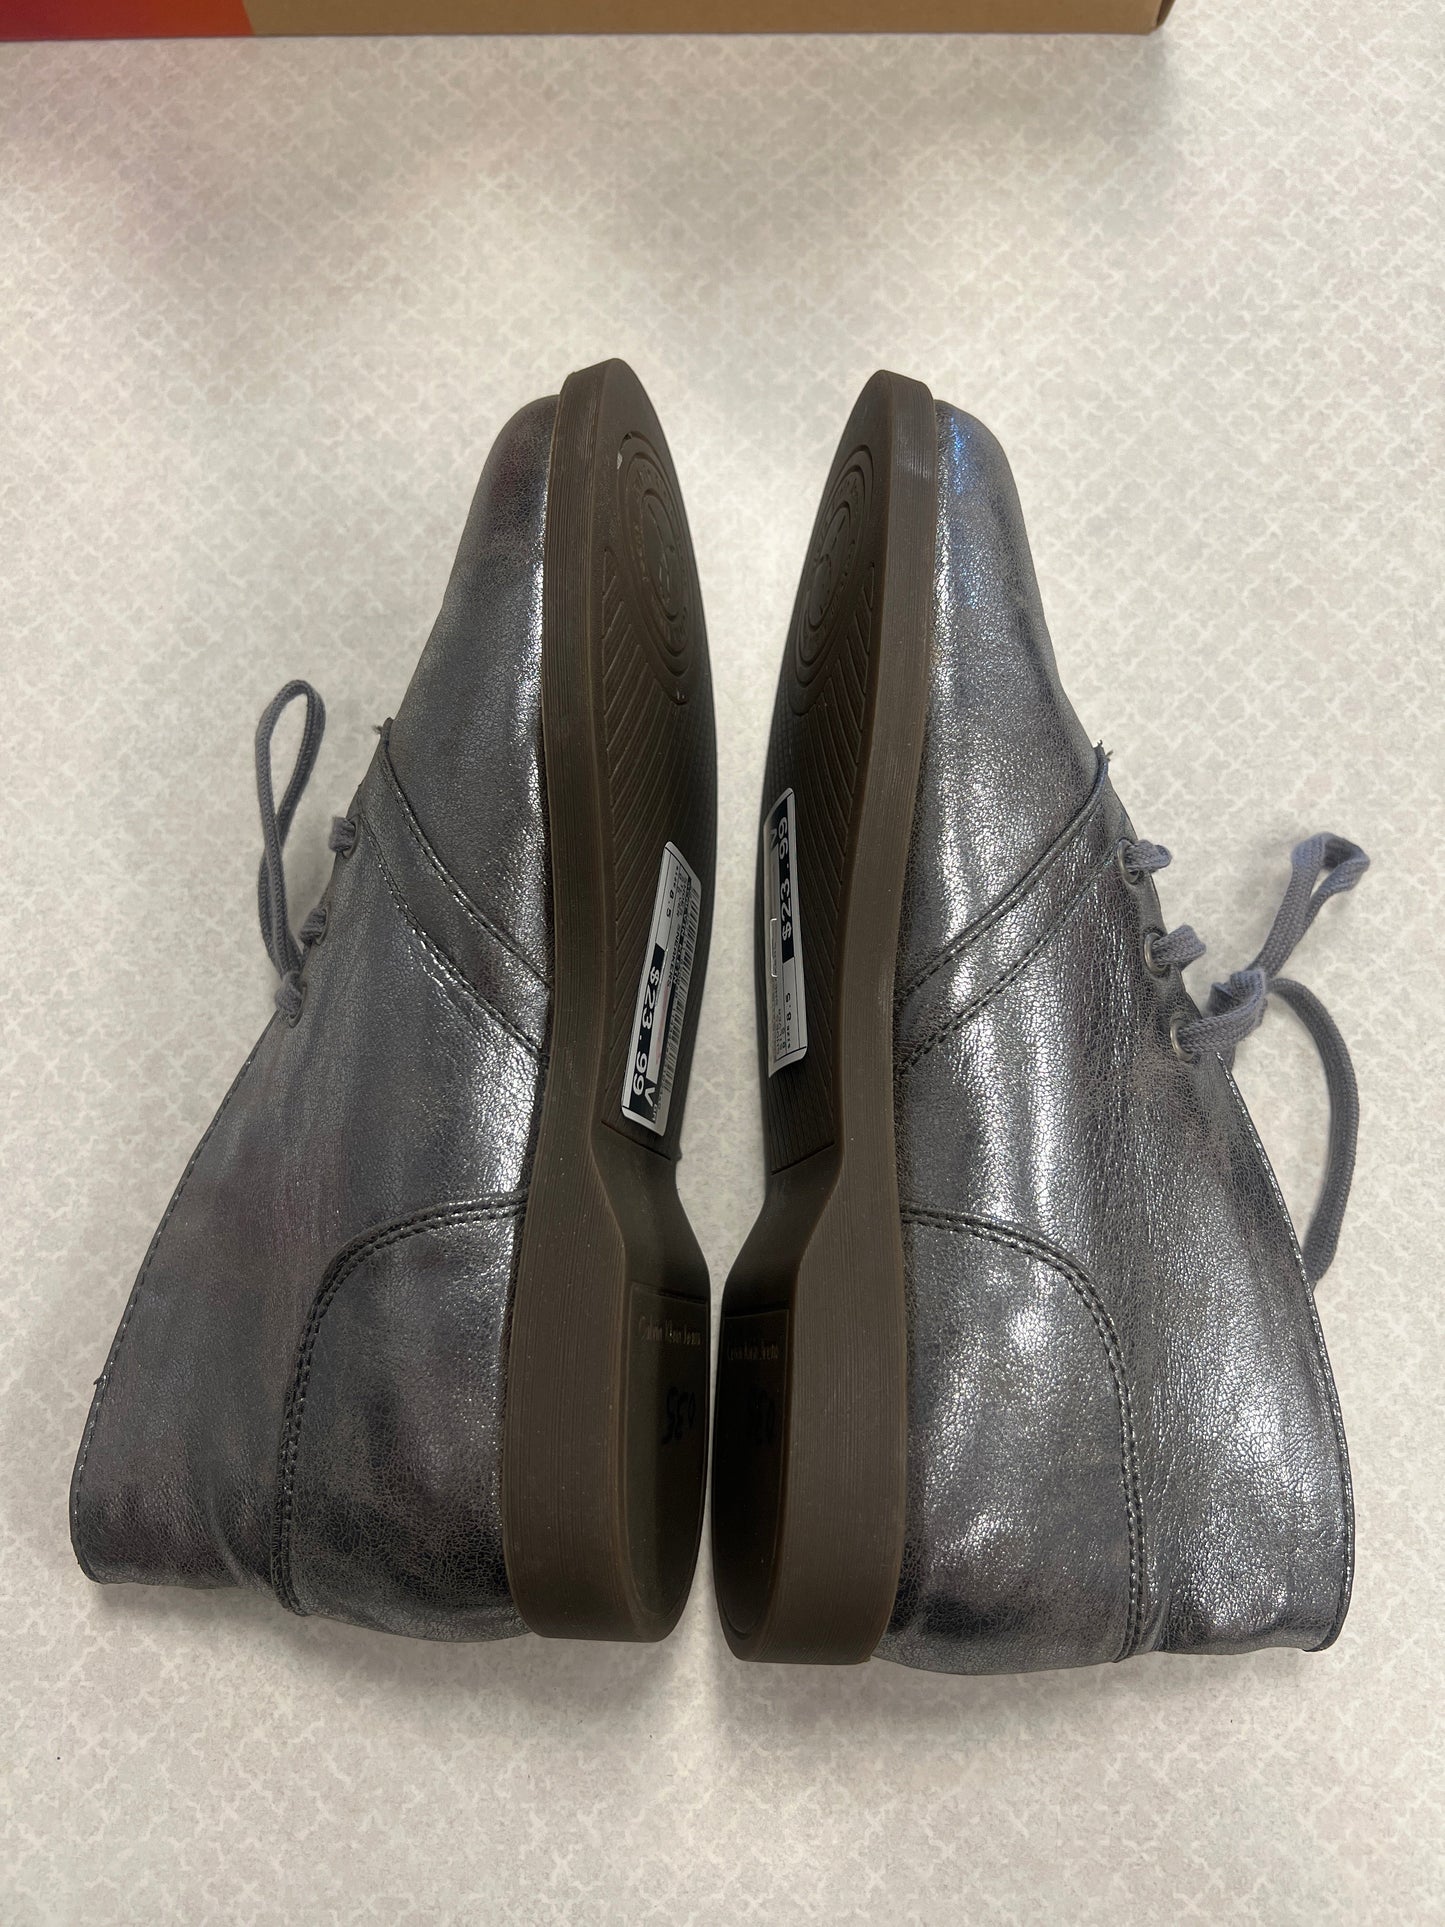 Shoes Sneakers By Calvin Klein  Size: 8.5